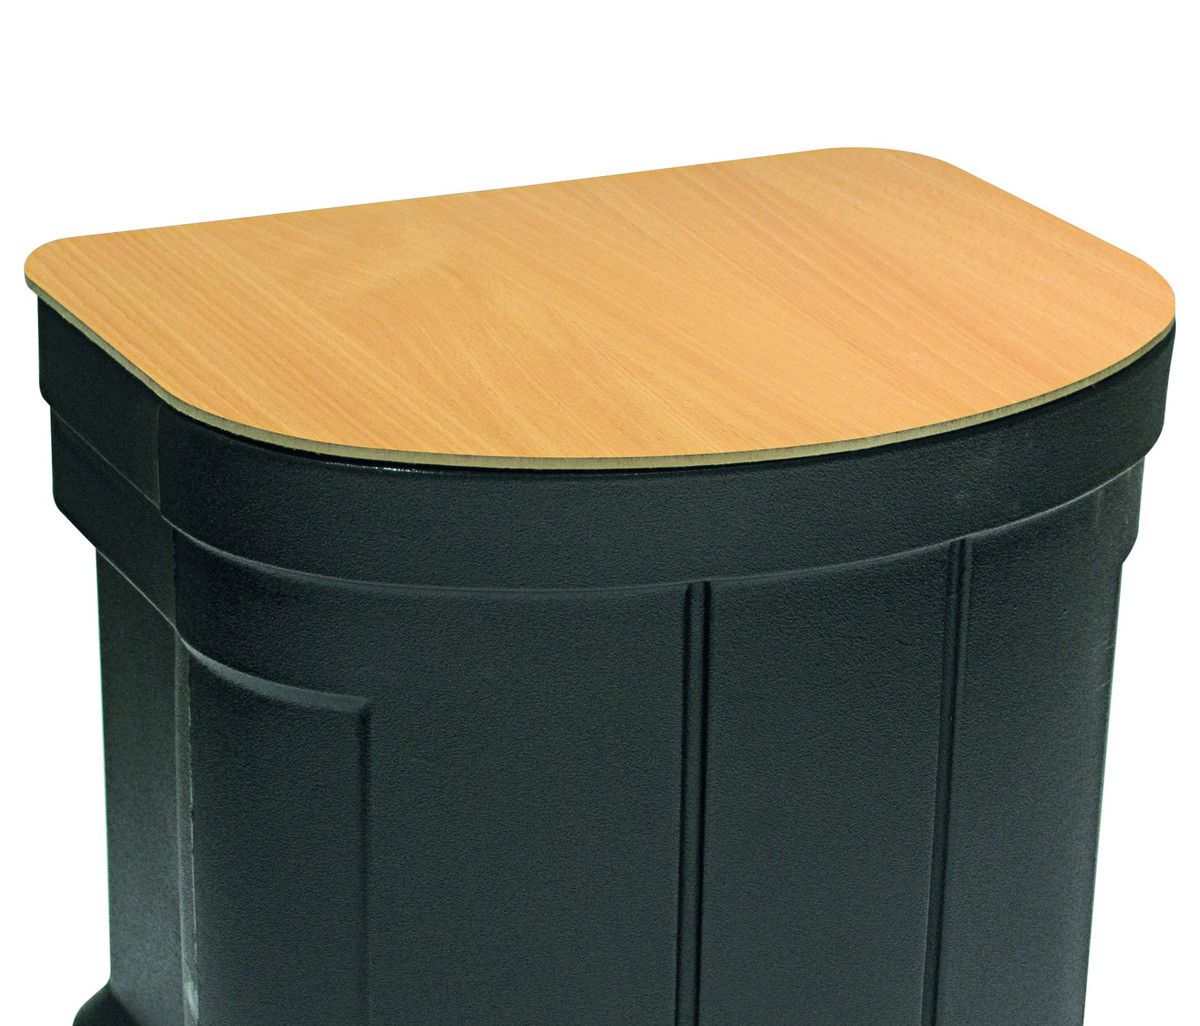 Twist Carry Case Table Top